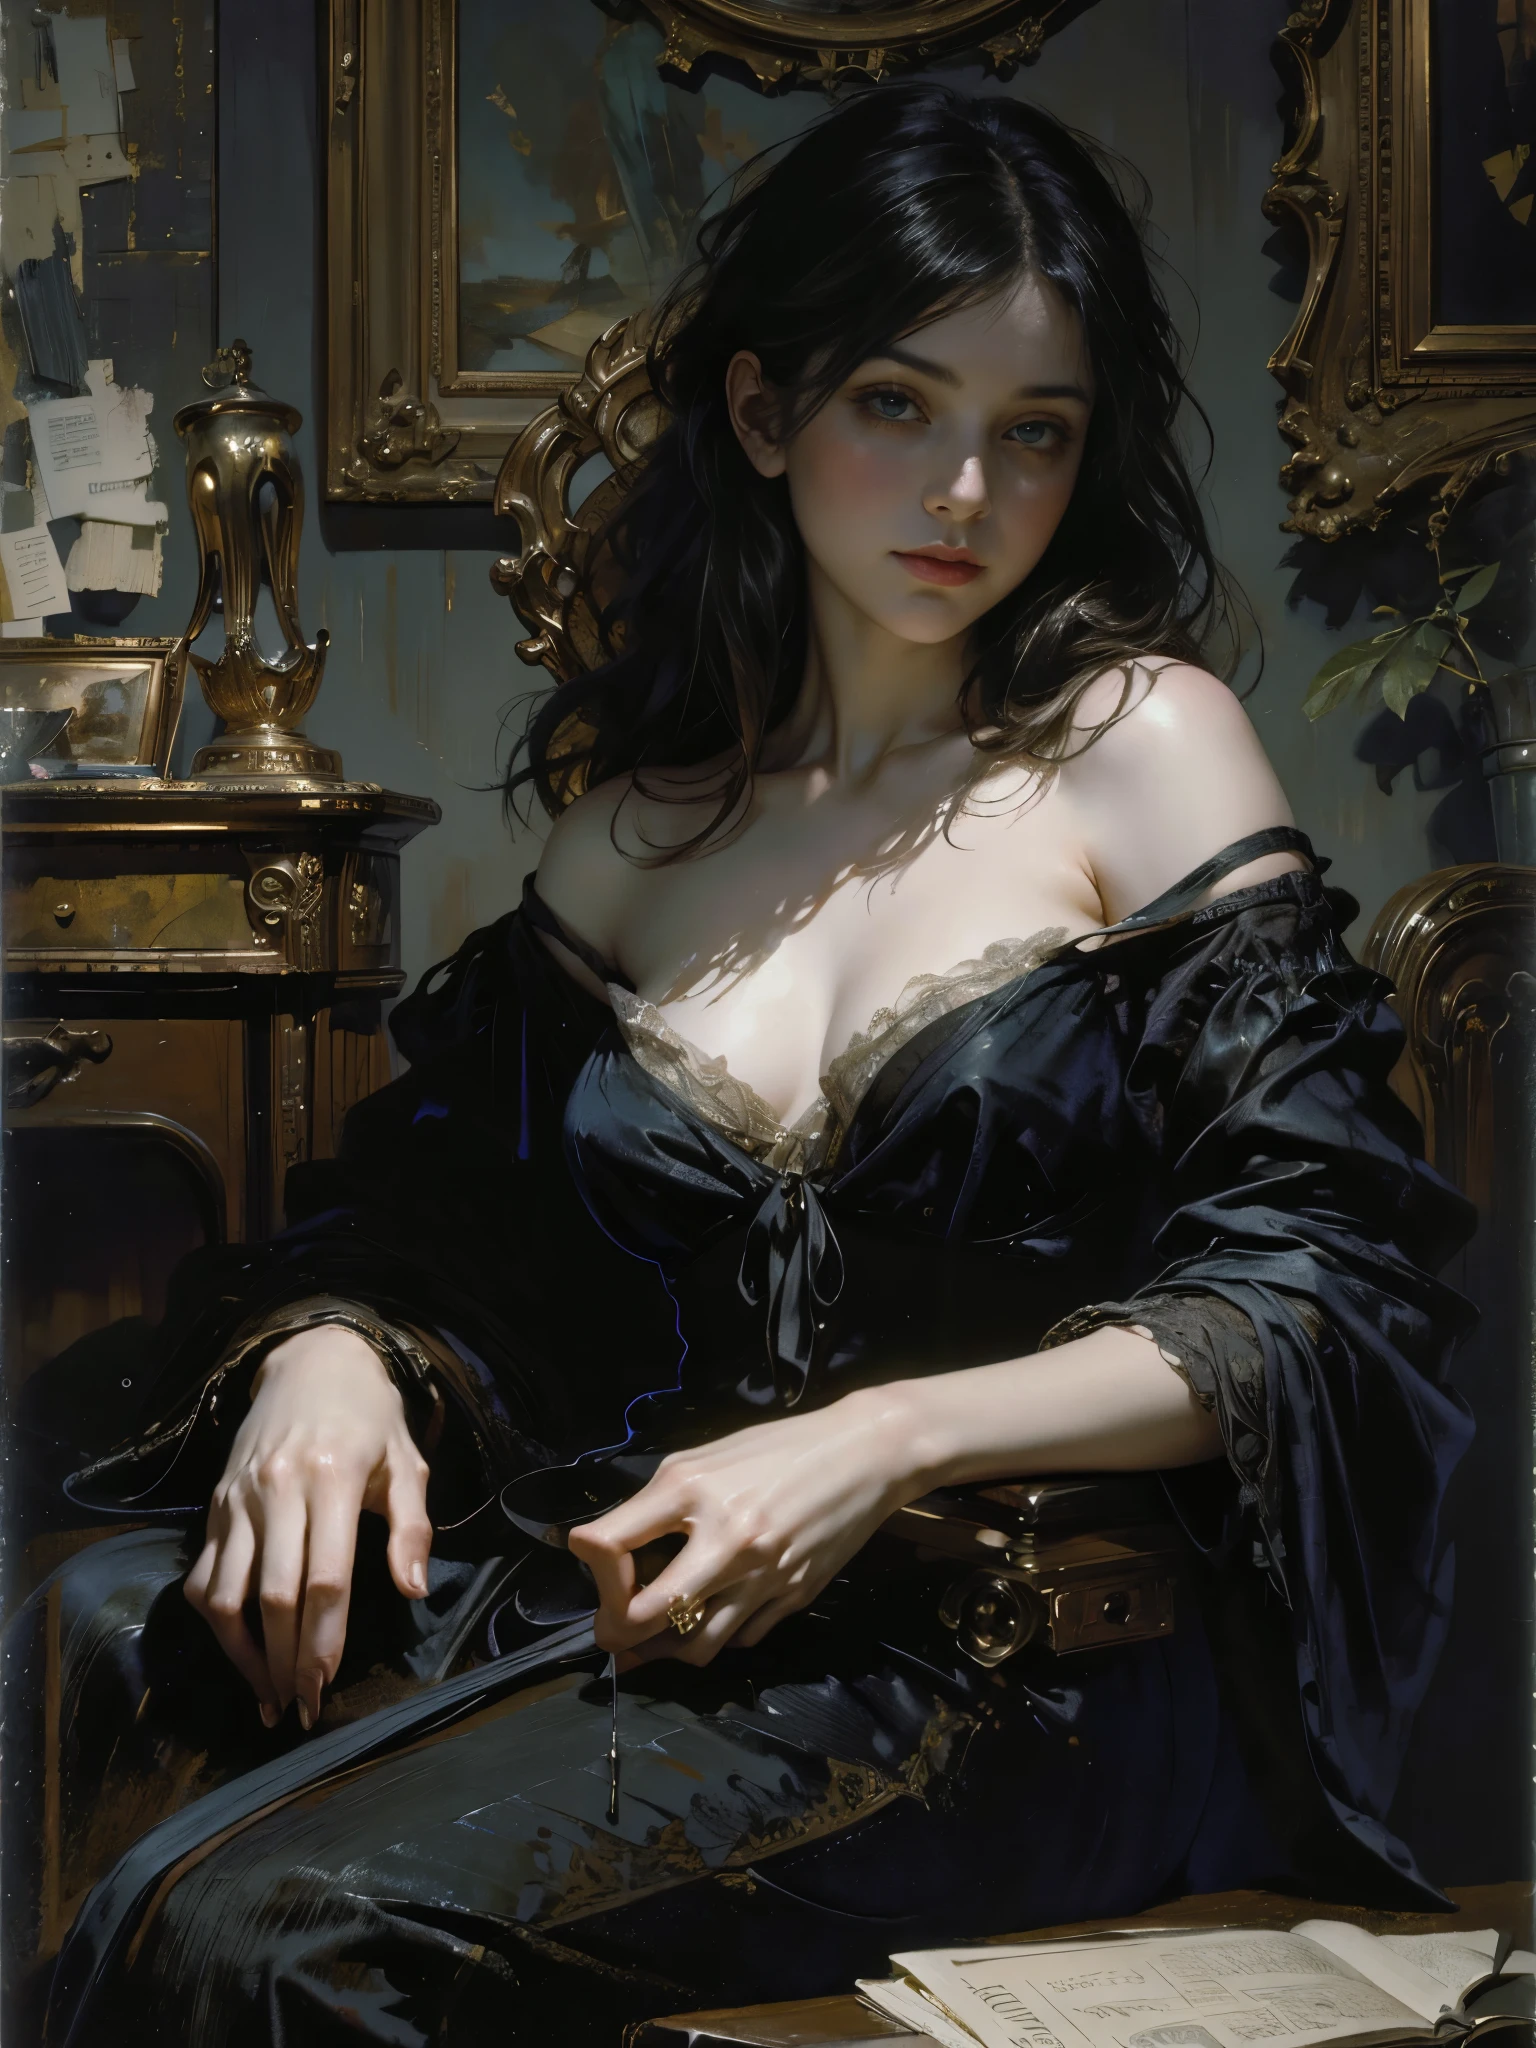 painting of woman, with influence of Jeremy Mann, Jeremy Mann, style of Jeremy Mann, Jeremy Mann painting, Jeremy Mann art, Ron Hicks, Liepke, Jeremy Mann and alphonse mucha, Works that influenced Edmund Blampid, robert lenkiewicz, Casey Baugh and James Jean, Works that influenced Willem Kalf, Nick Alm, tumbler, figurative art, Intense watercolor painting, watercolor detailed art,Beautiful and expressive paintings, Beautiful artwork illustration, wonderful, cool beauty, highest quality, official art, perfect composition,perfect angle, best shot, women only, sharp outline, melancholy, nostalgia, nostalgia, Eyes without pupils, color eye, ideal anima, In search of lost time, marcel proust, sentimental, Paris in the first half of the 20th century, montparnasse, Full body Esbian, The ambiguous boundary between present and past